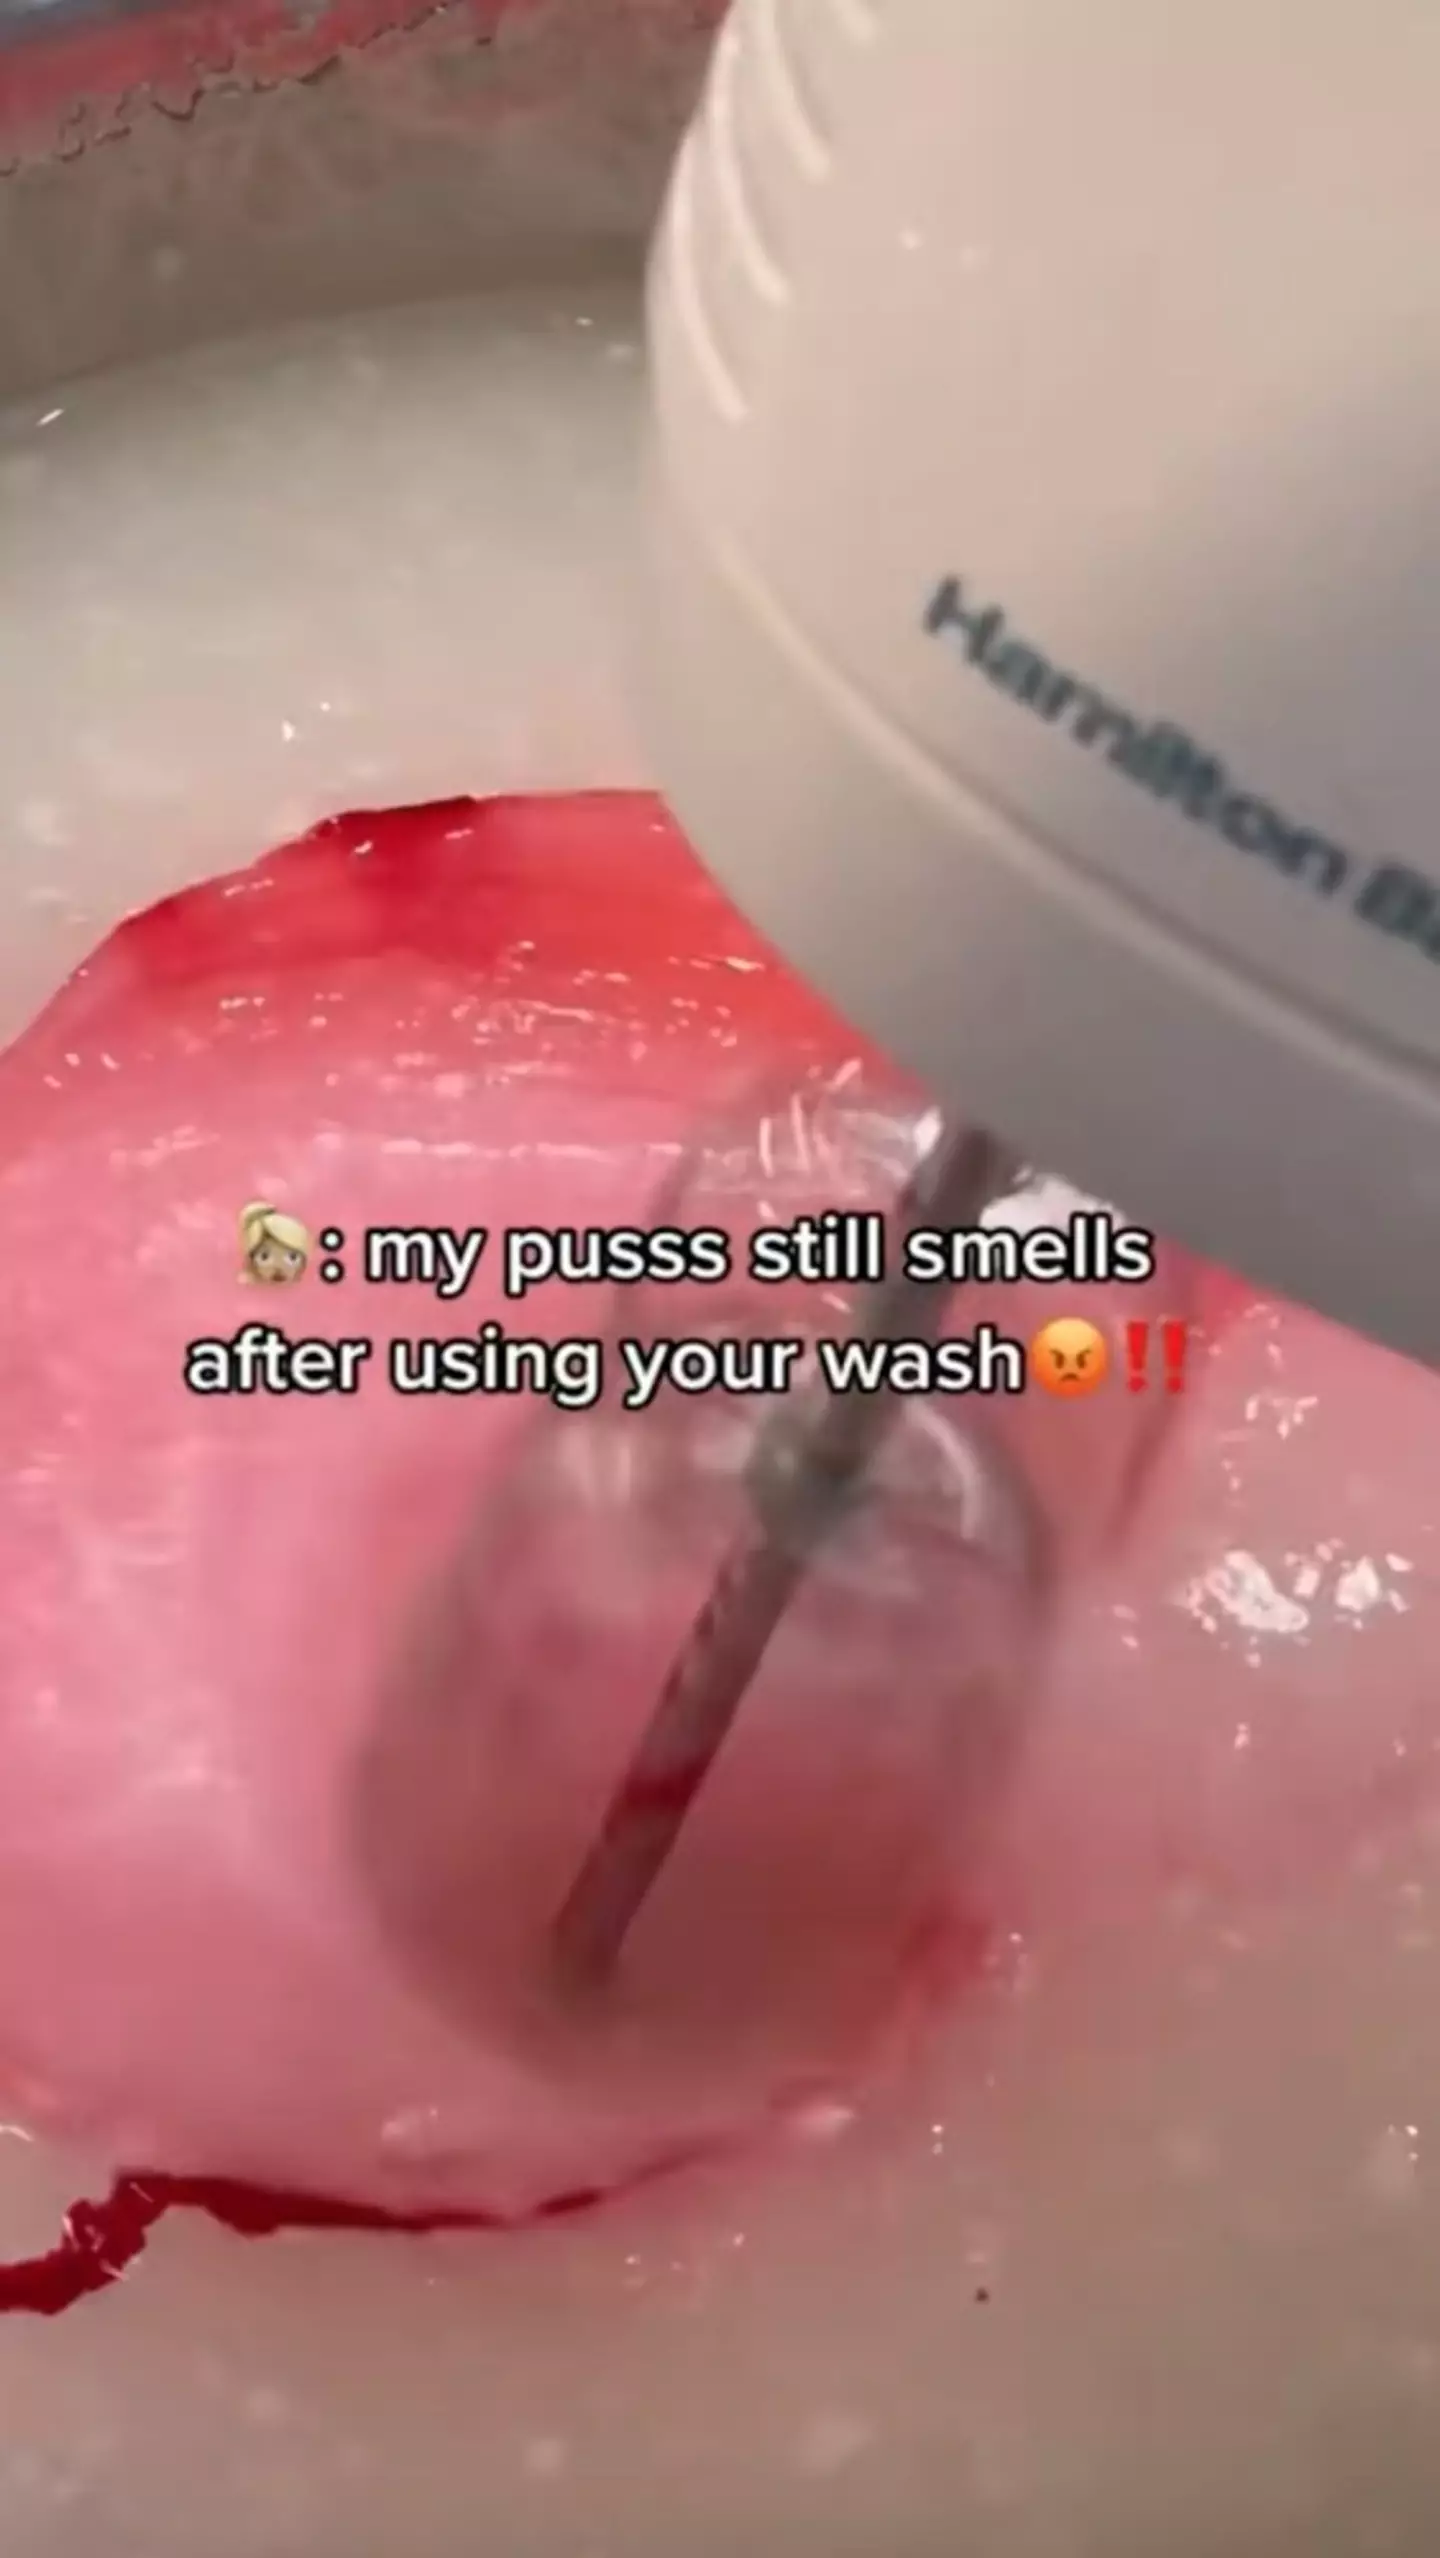 The doctor responded to a video promoting a product that claims to clean the vagina.